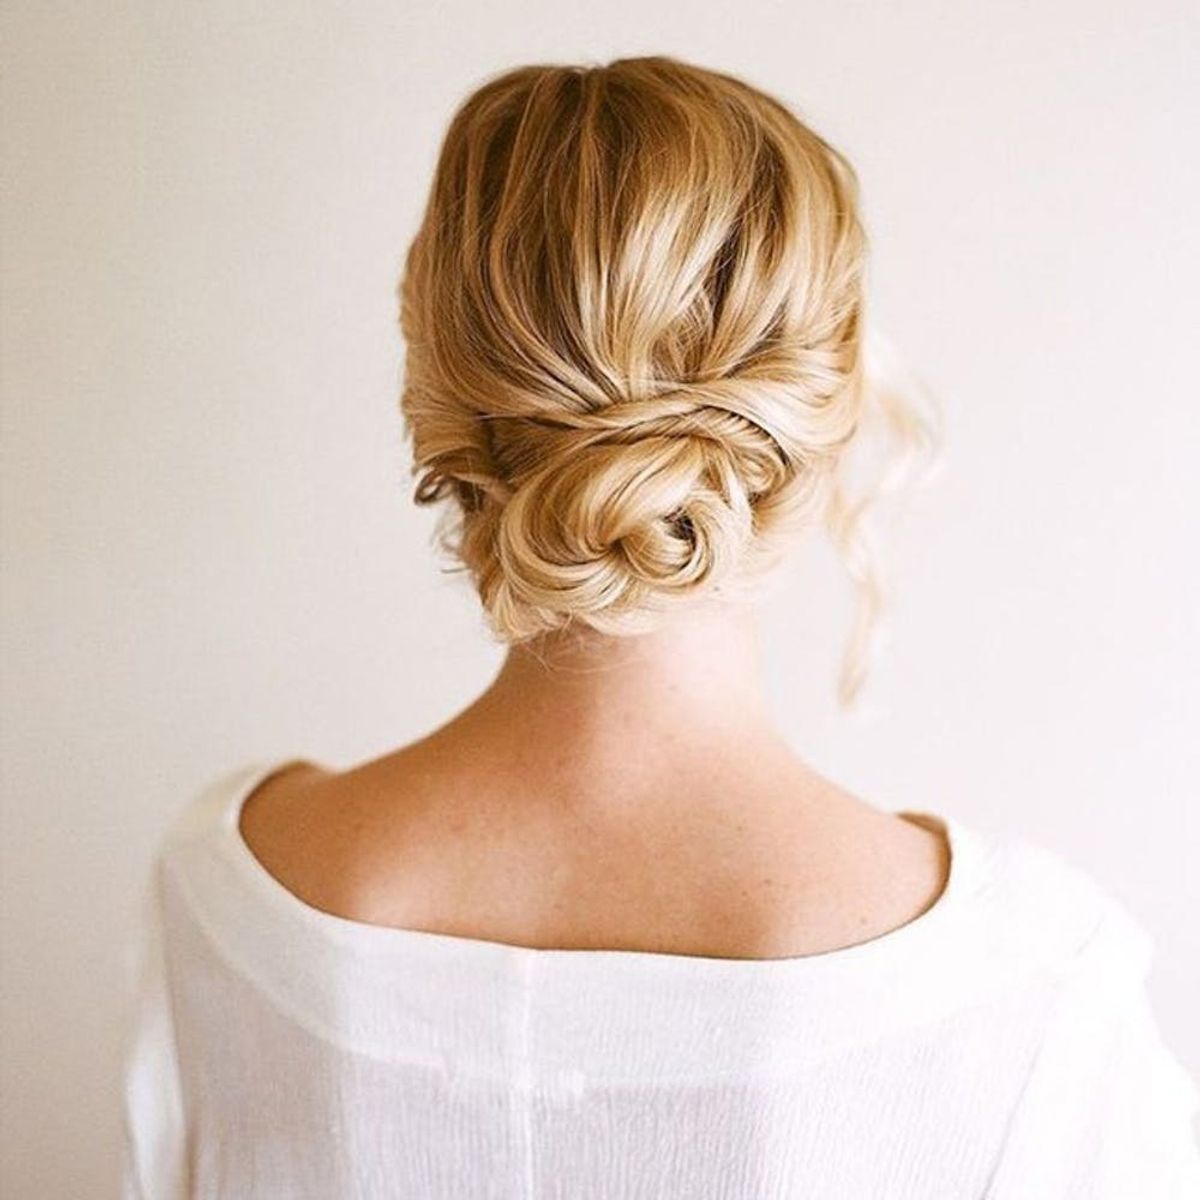 13 Easy Updos for Your Holiday Parties and Beyond